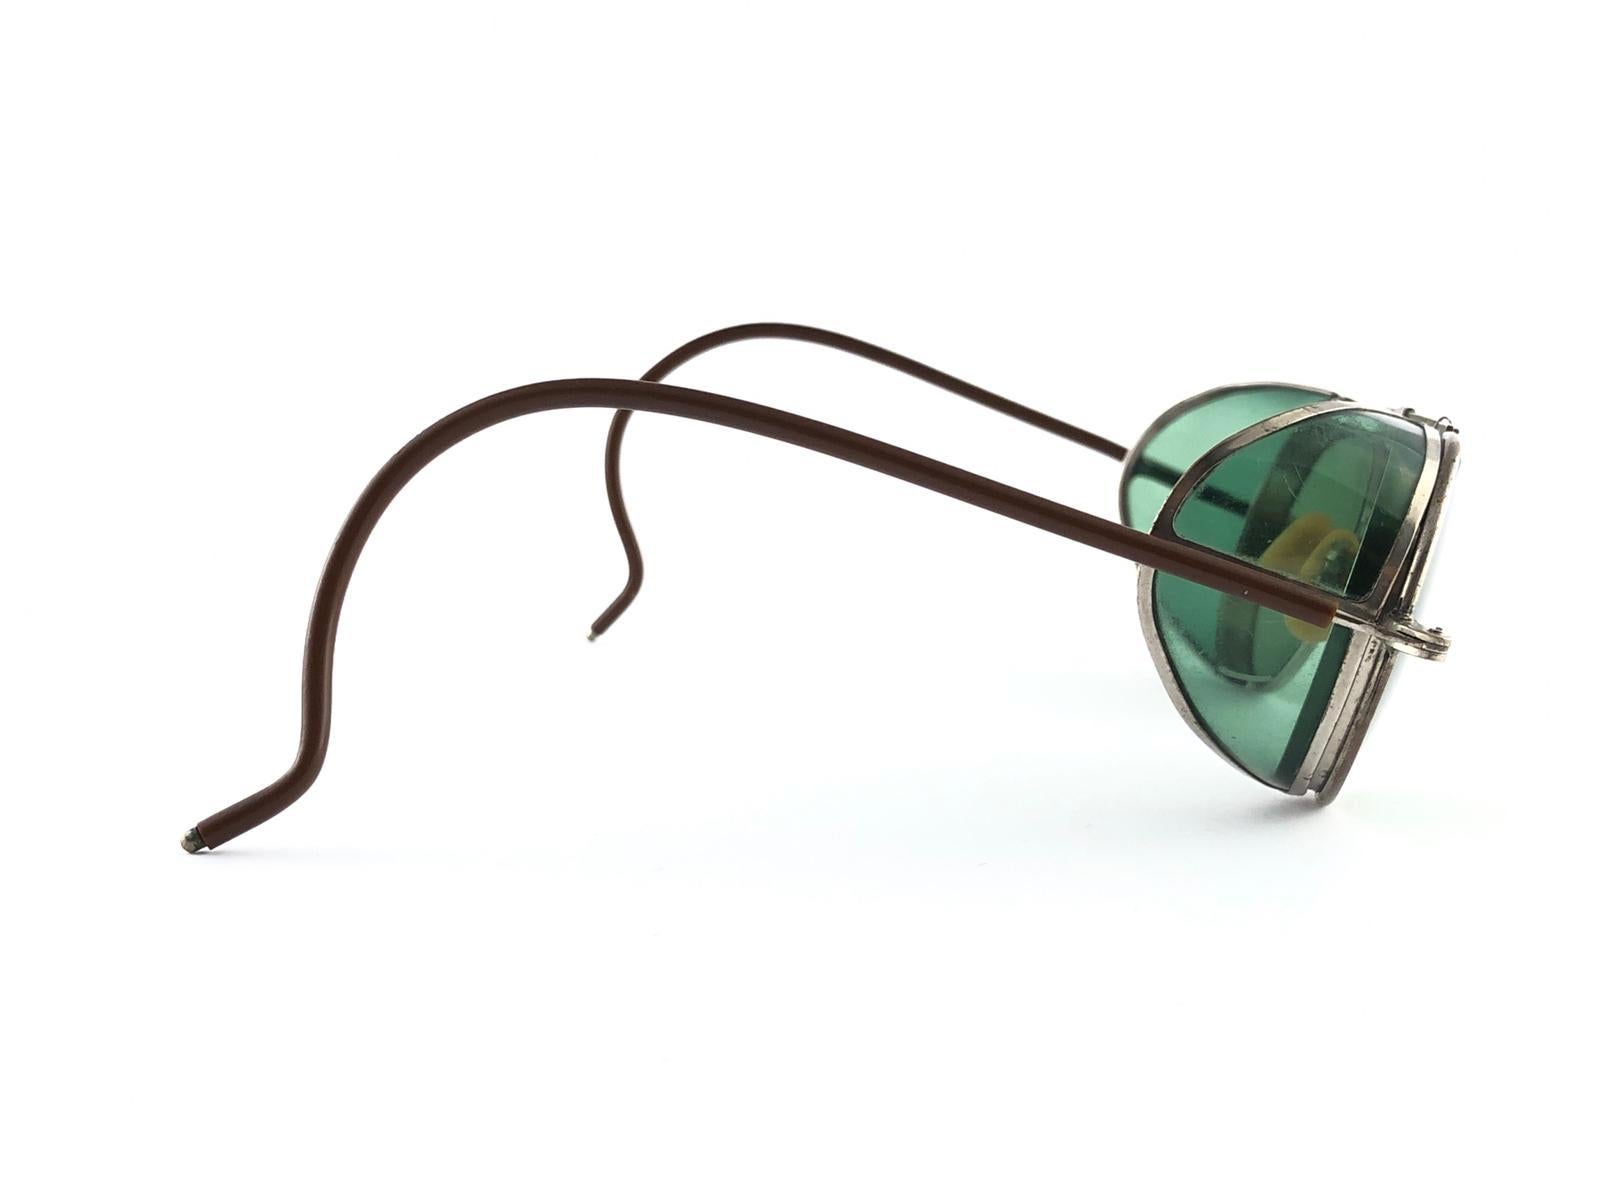 Mint Vintage Bausch & Lomb Goggles Green Steampunk 50s Collector Item Sunglasses For Sale 1